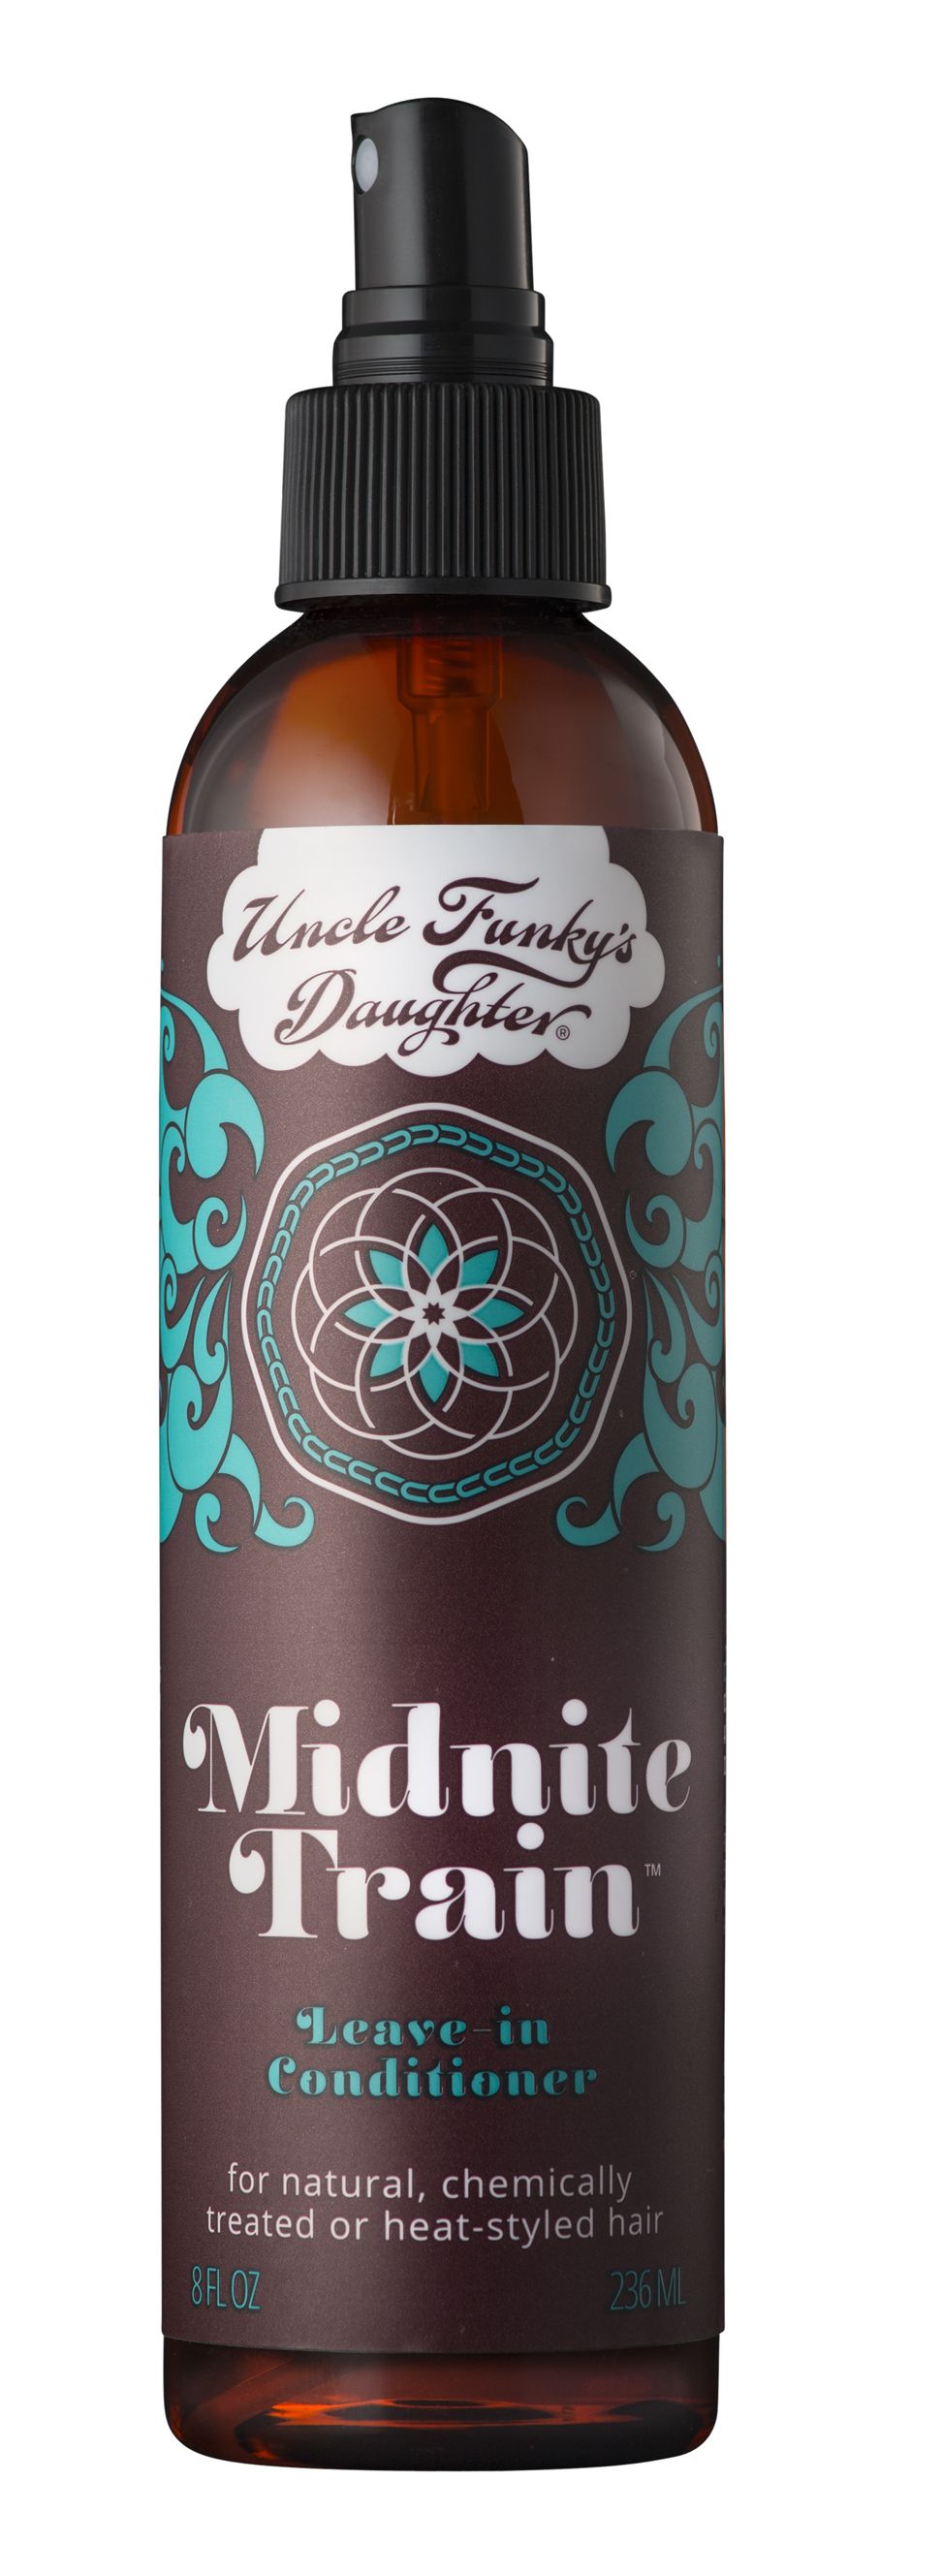 Uncle Funky's Daughter Midnite Train Leave in Conditioner- 8 oz